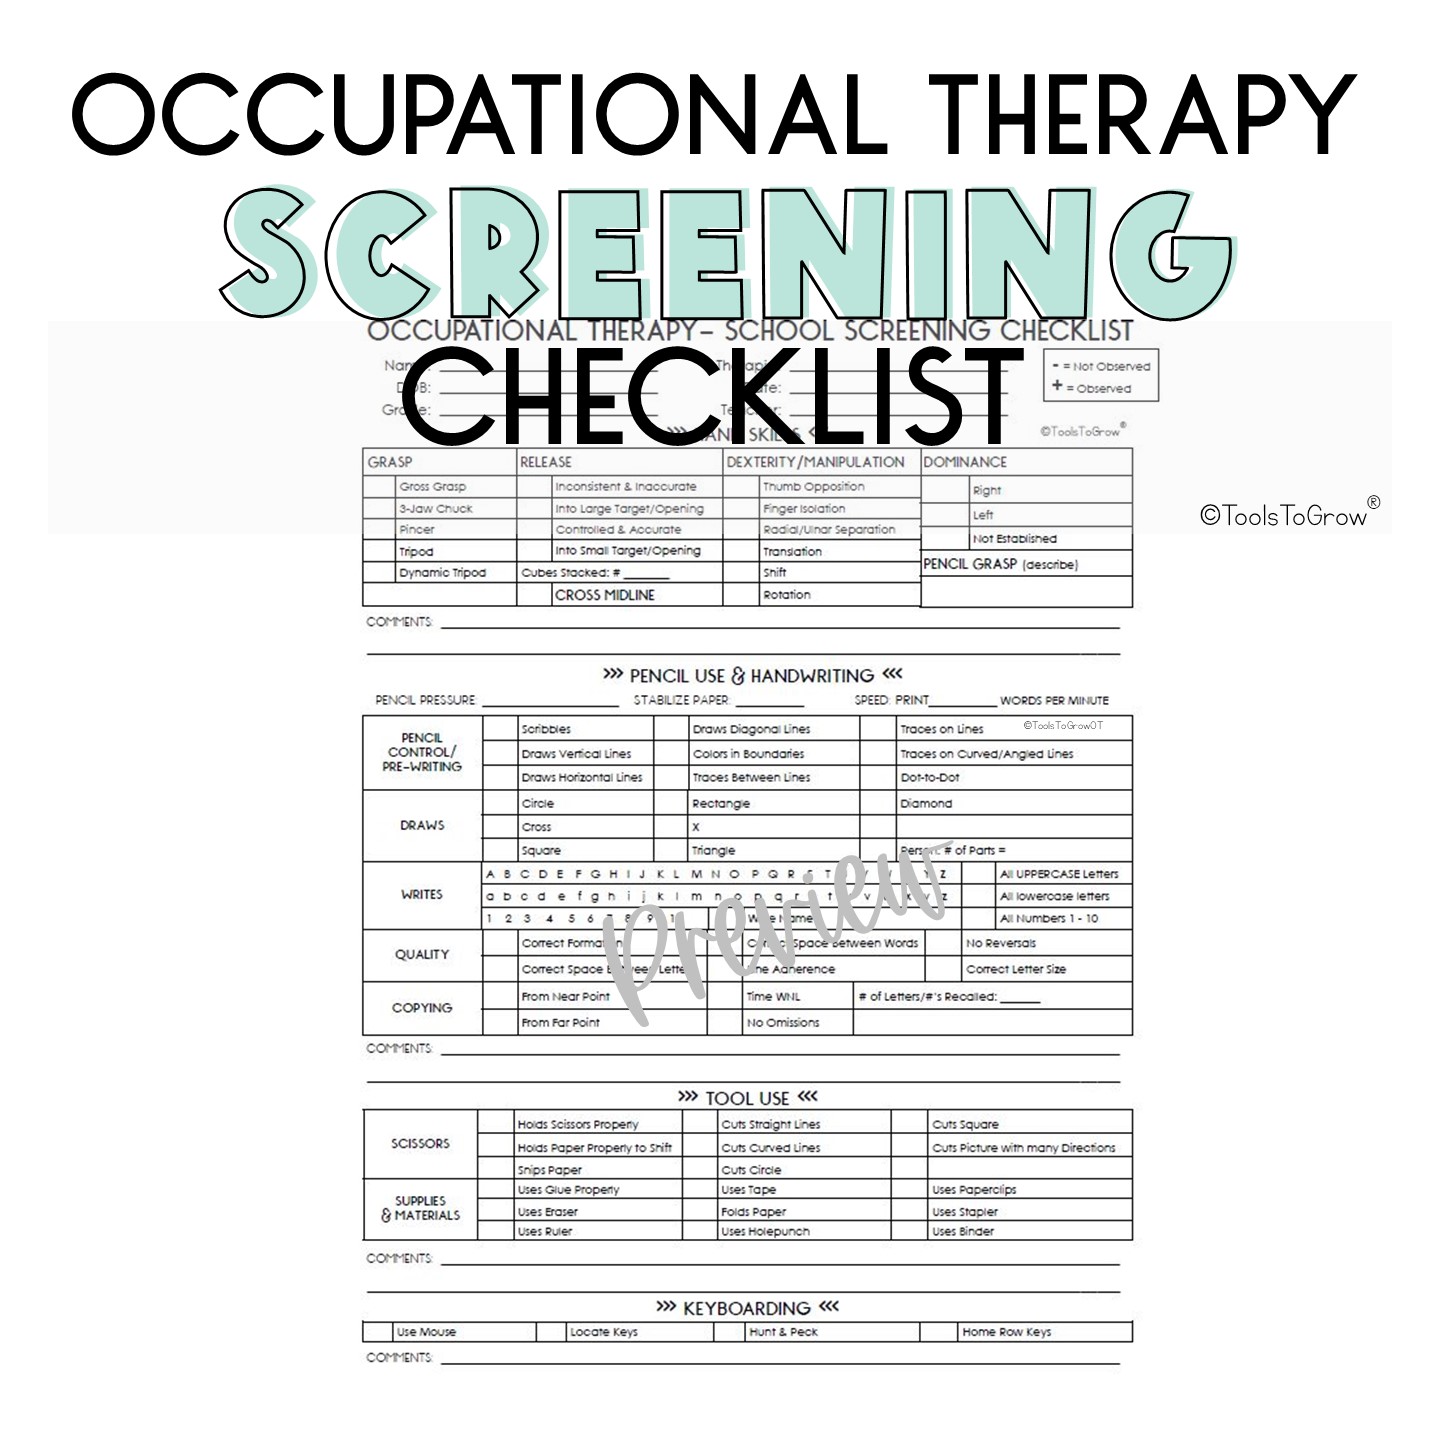 occupational-therapy-school-screening-checklist-shop-tools-to-grow